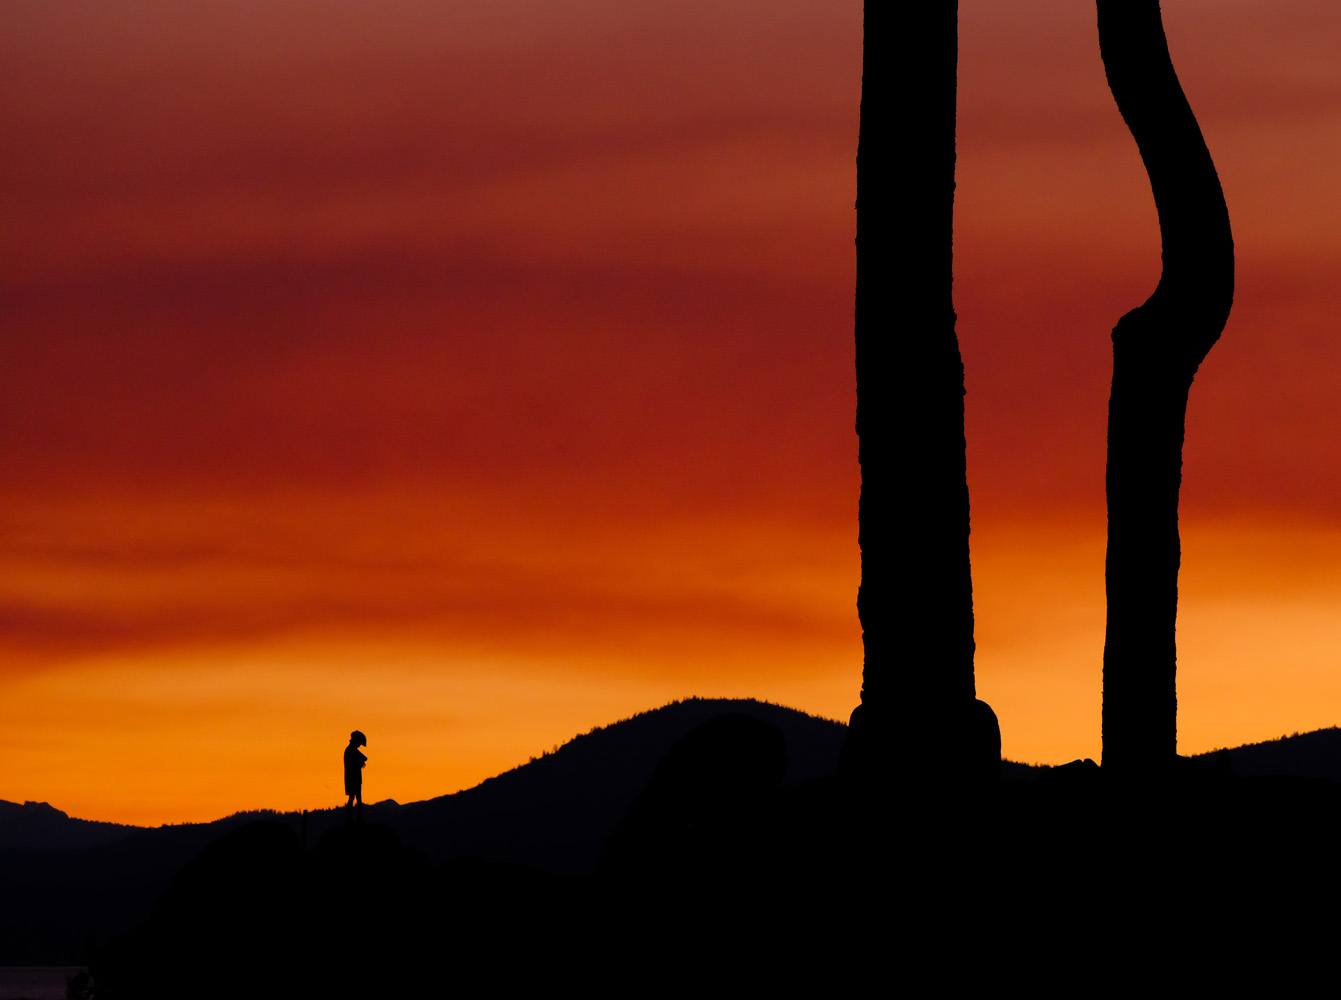 telephoto image of silhouetted person standing on horizon at sunset.